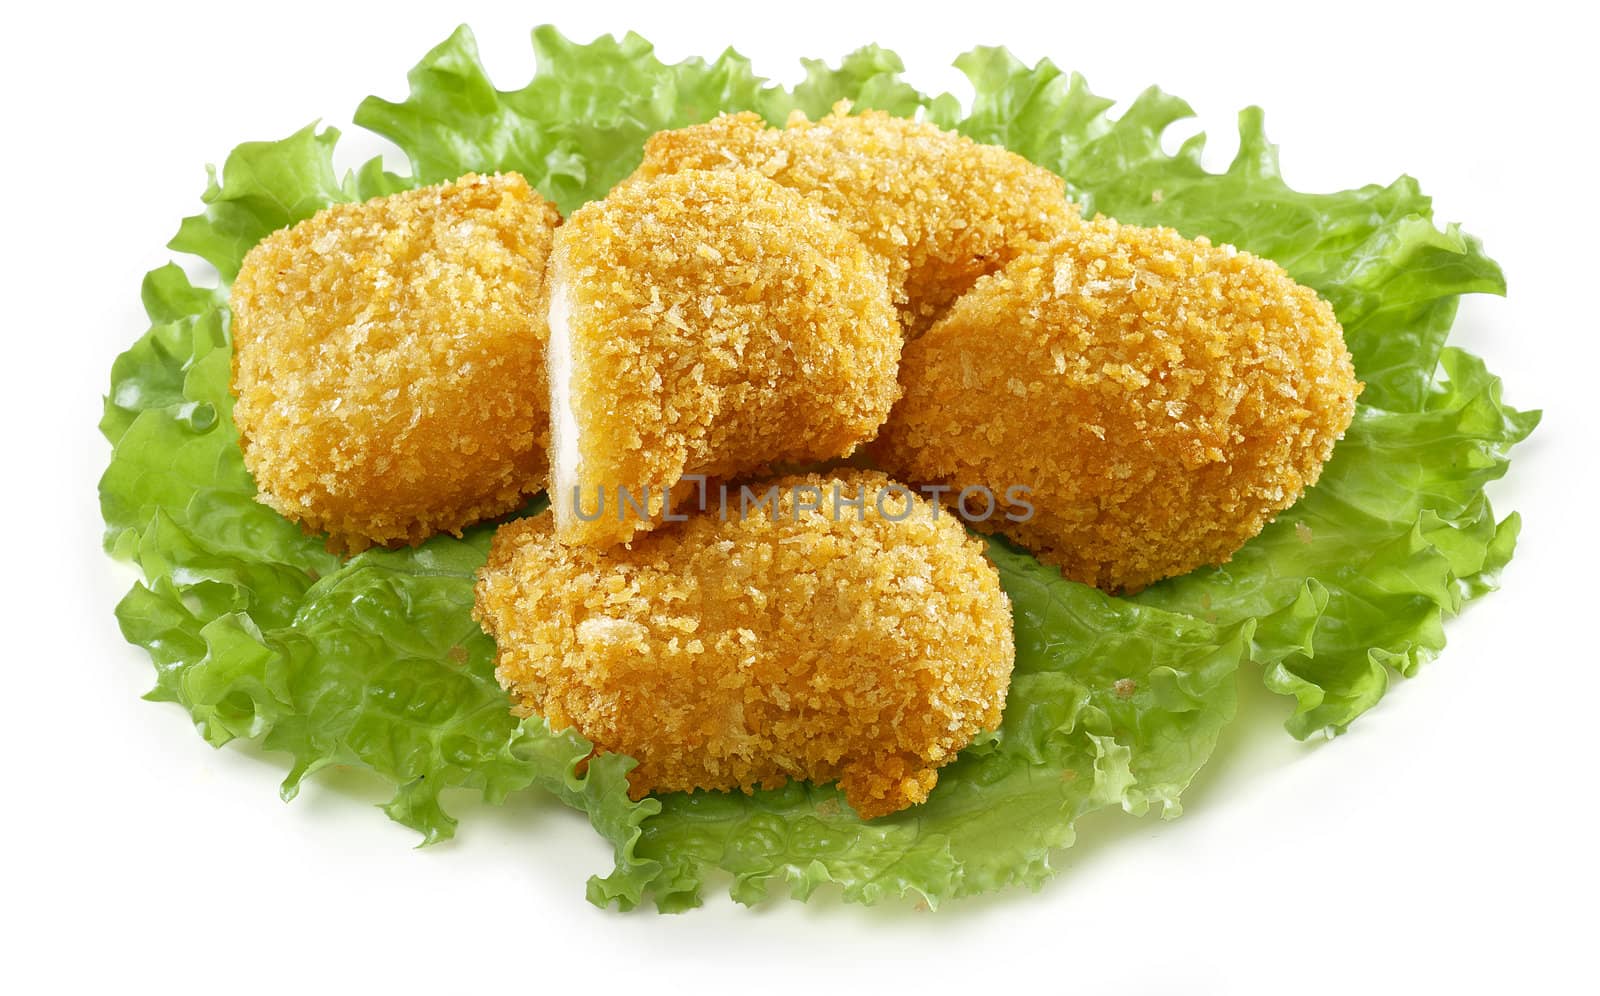 Nuggets on the lettuce by Angorius